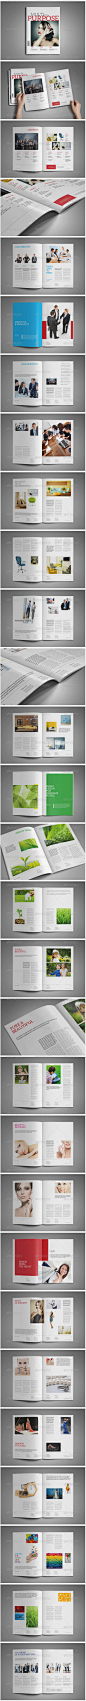 Print Templates - A4/Letter 50 Pages Mgz (Vol. 25) | GraphicRiver